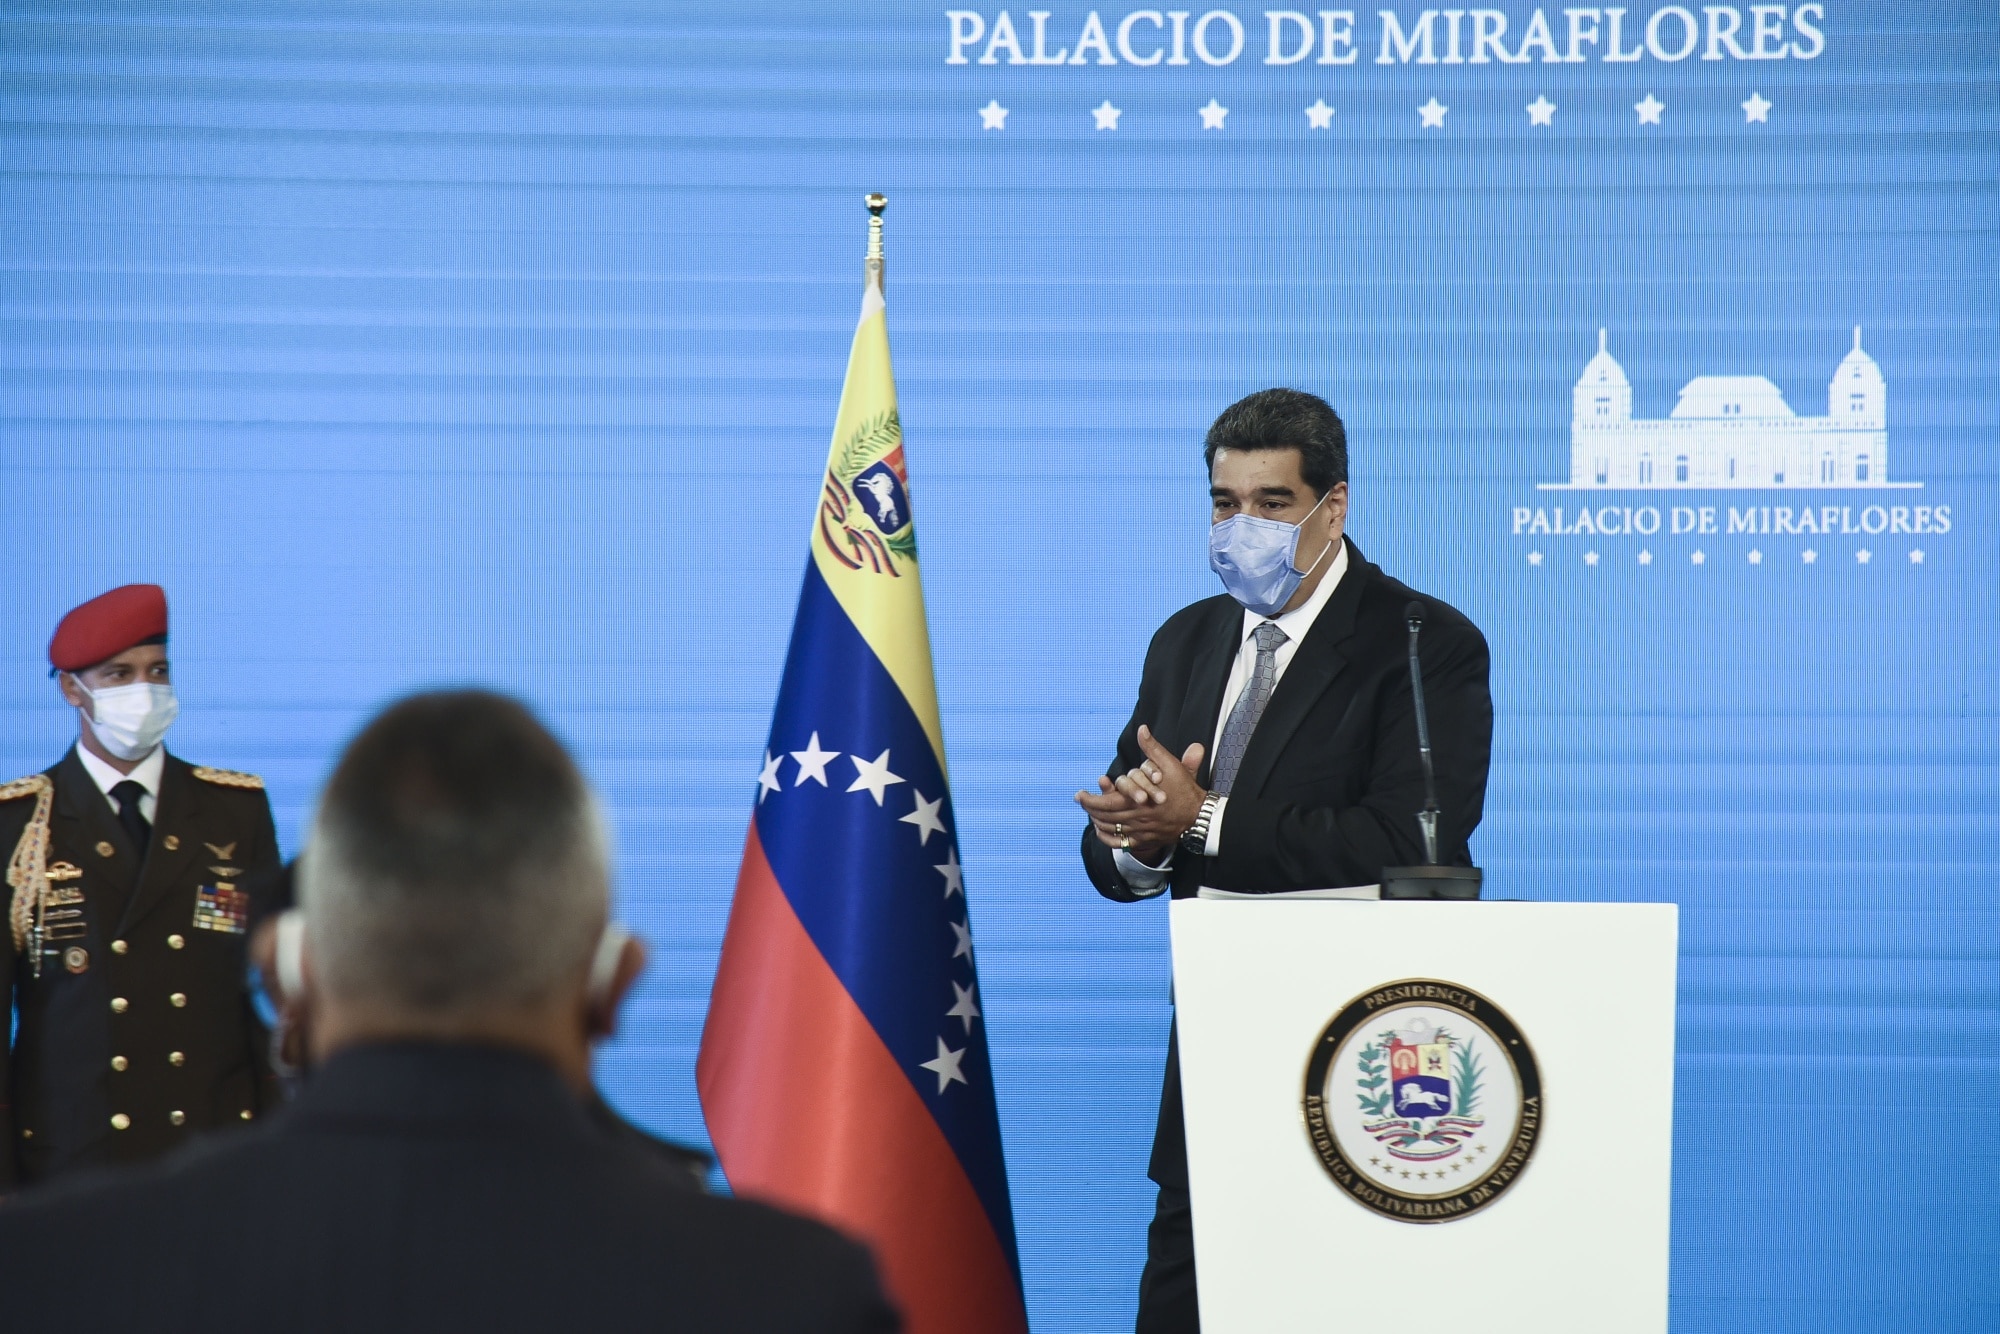 Nicolas Maduro wears a protective mask following a press conference at Miraflores Palace in Caracas on Feb. 17. Photographer: Carlos Becerra/Bloomberg